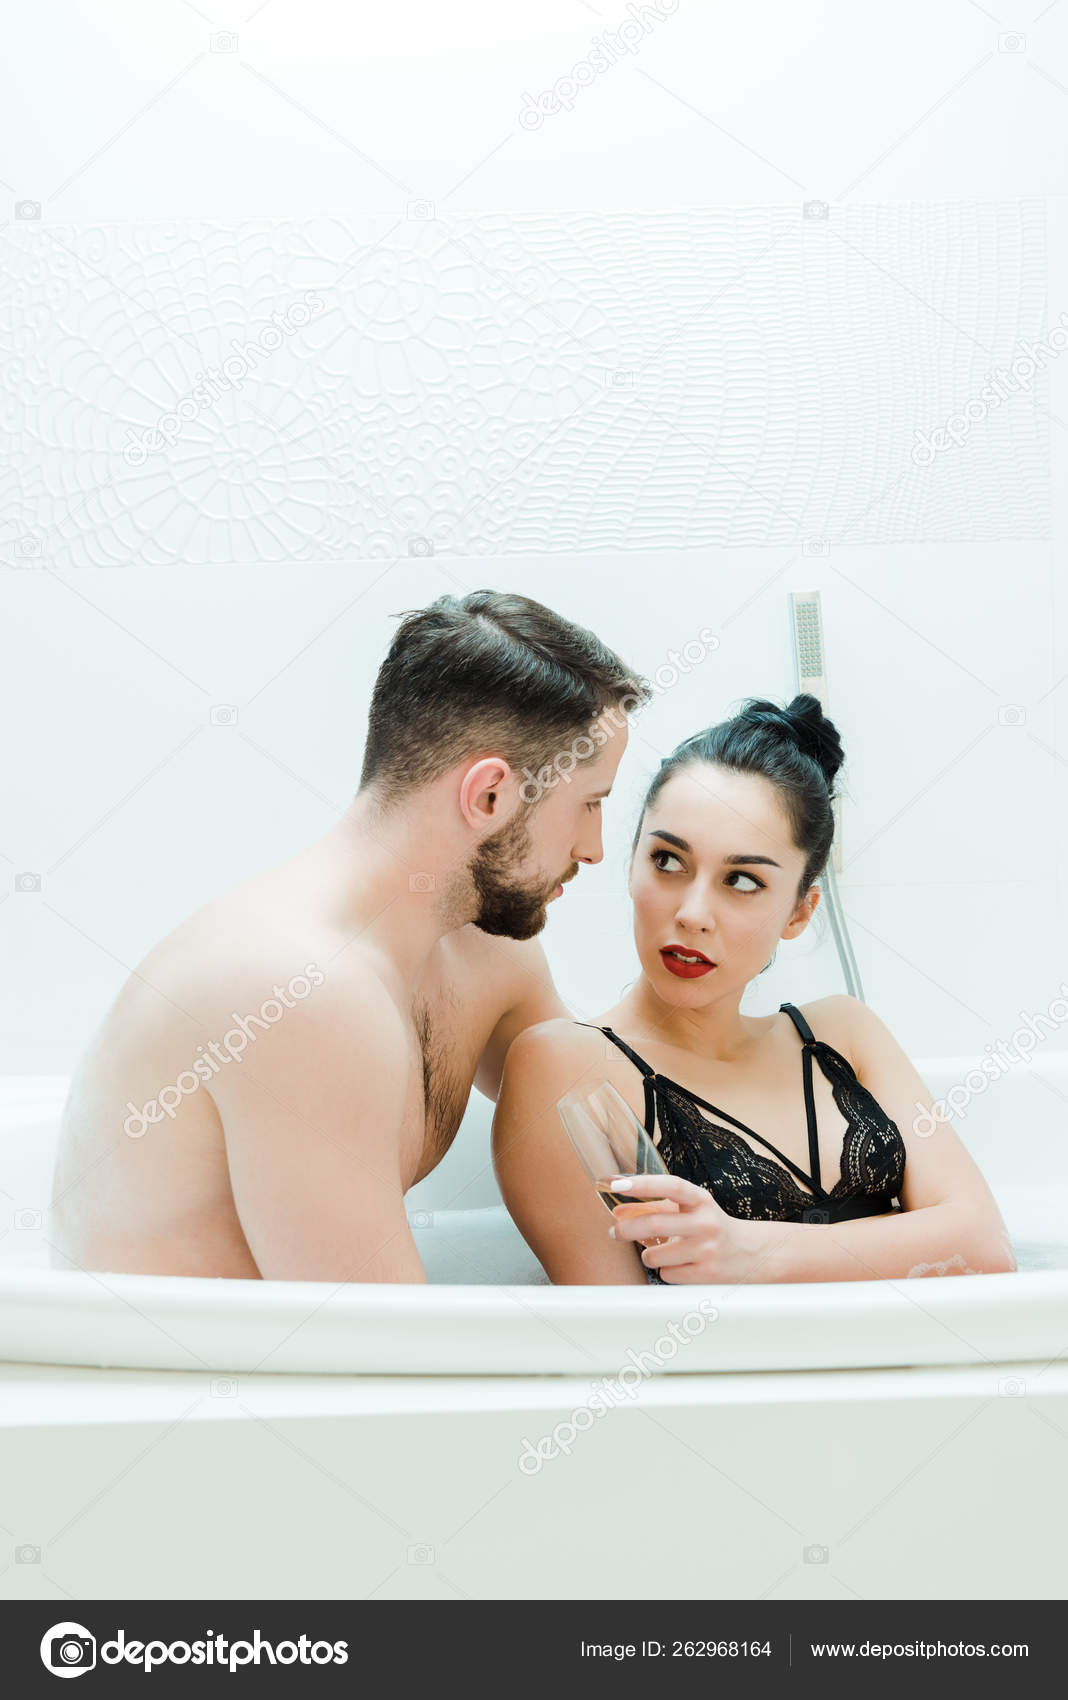 Handsome Shirtless Man Looking Brunette Woman Holding